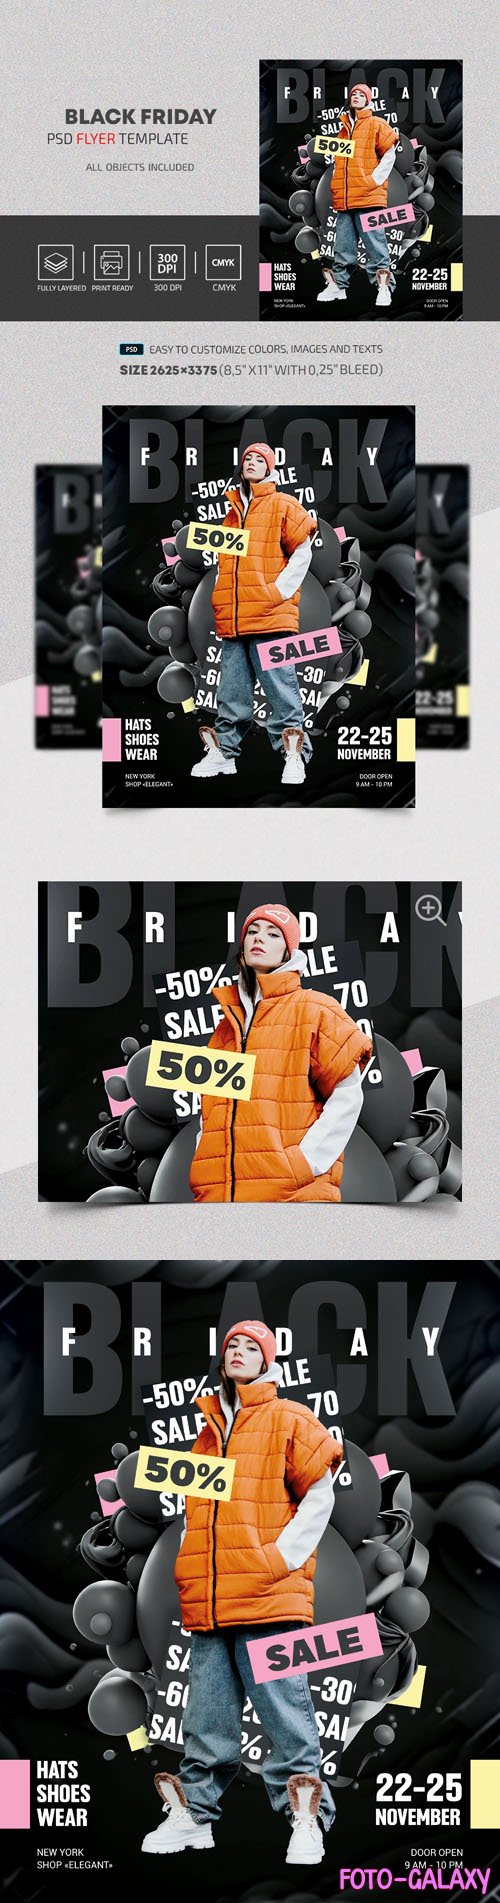 Black Friday - Discount Flyer PSD Template